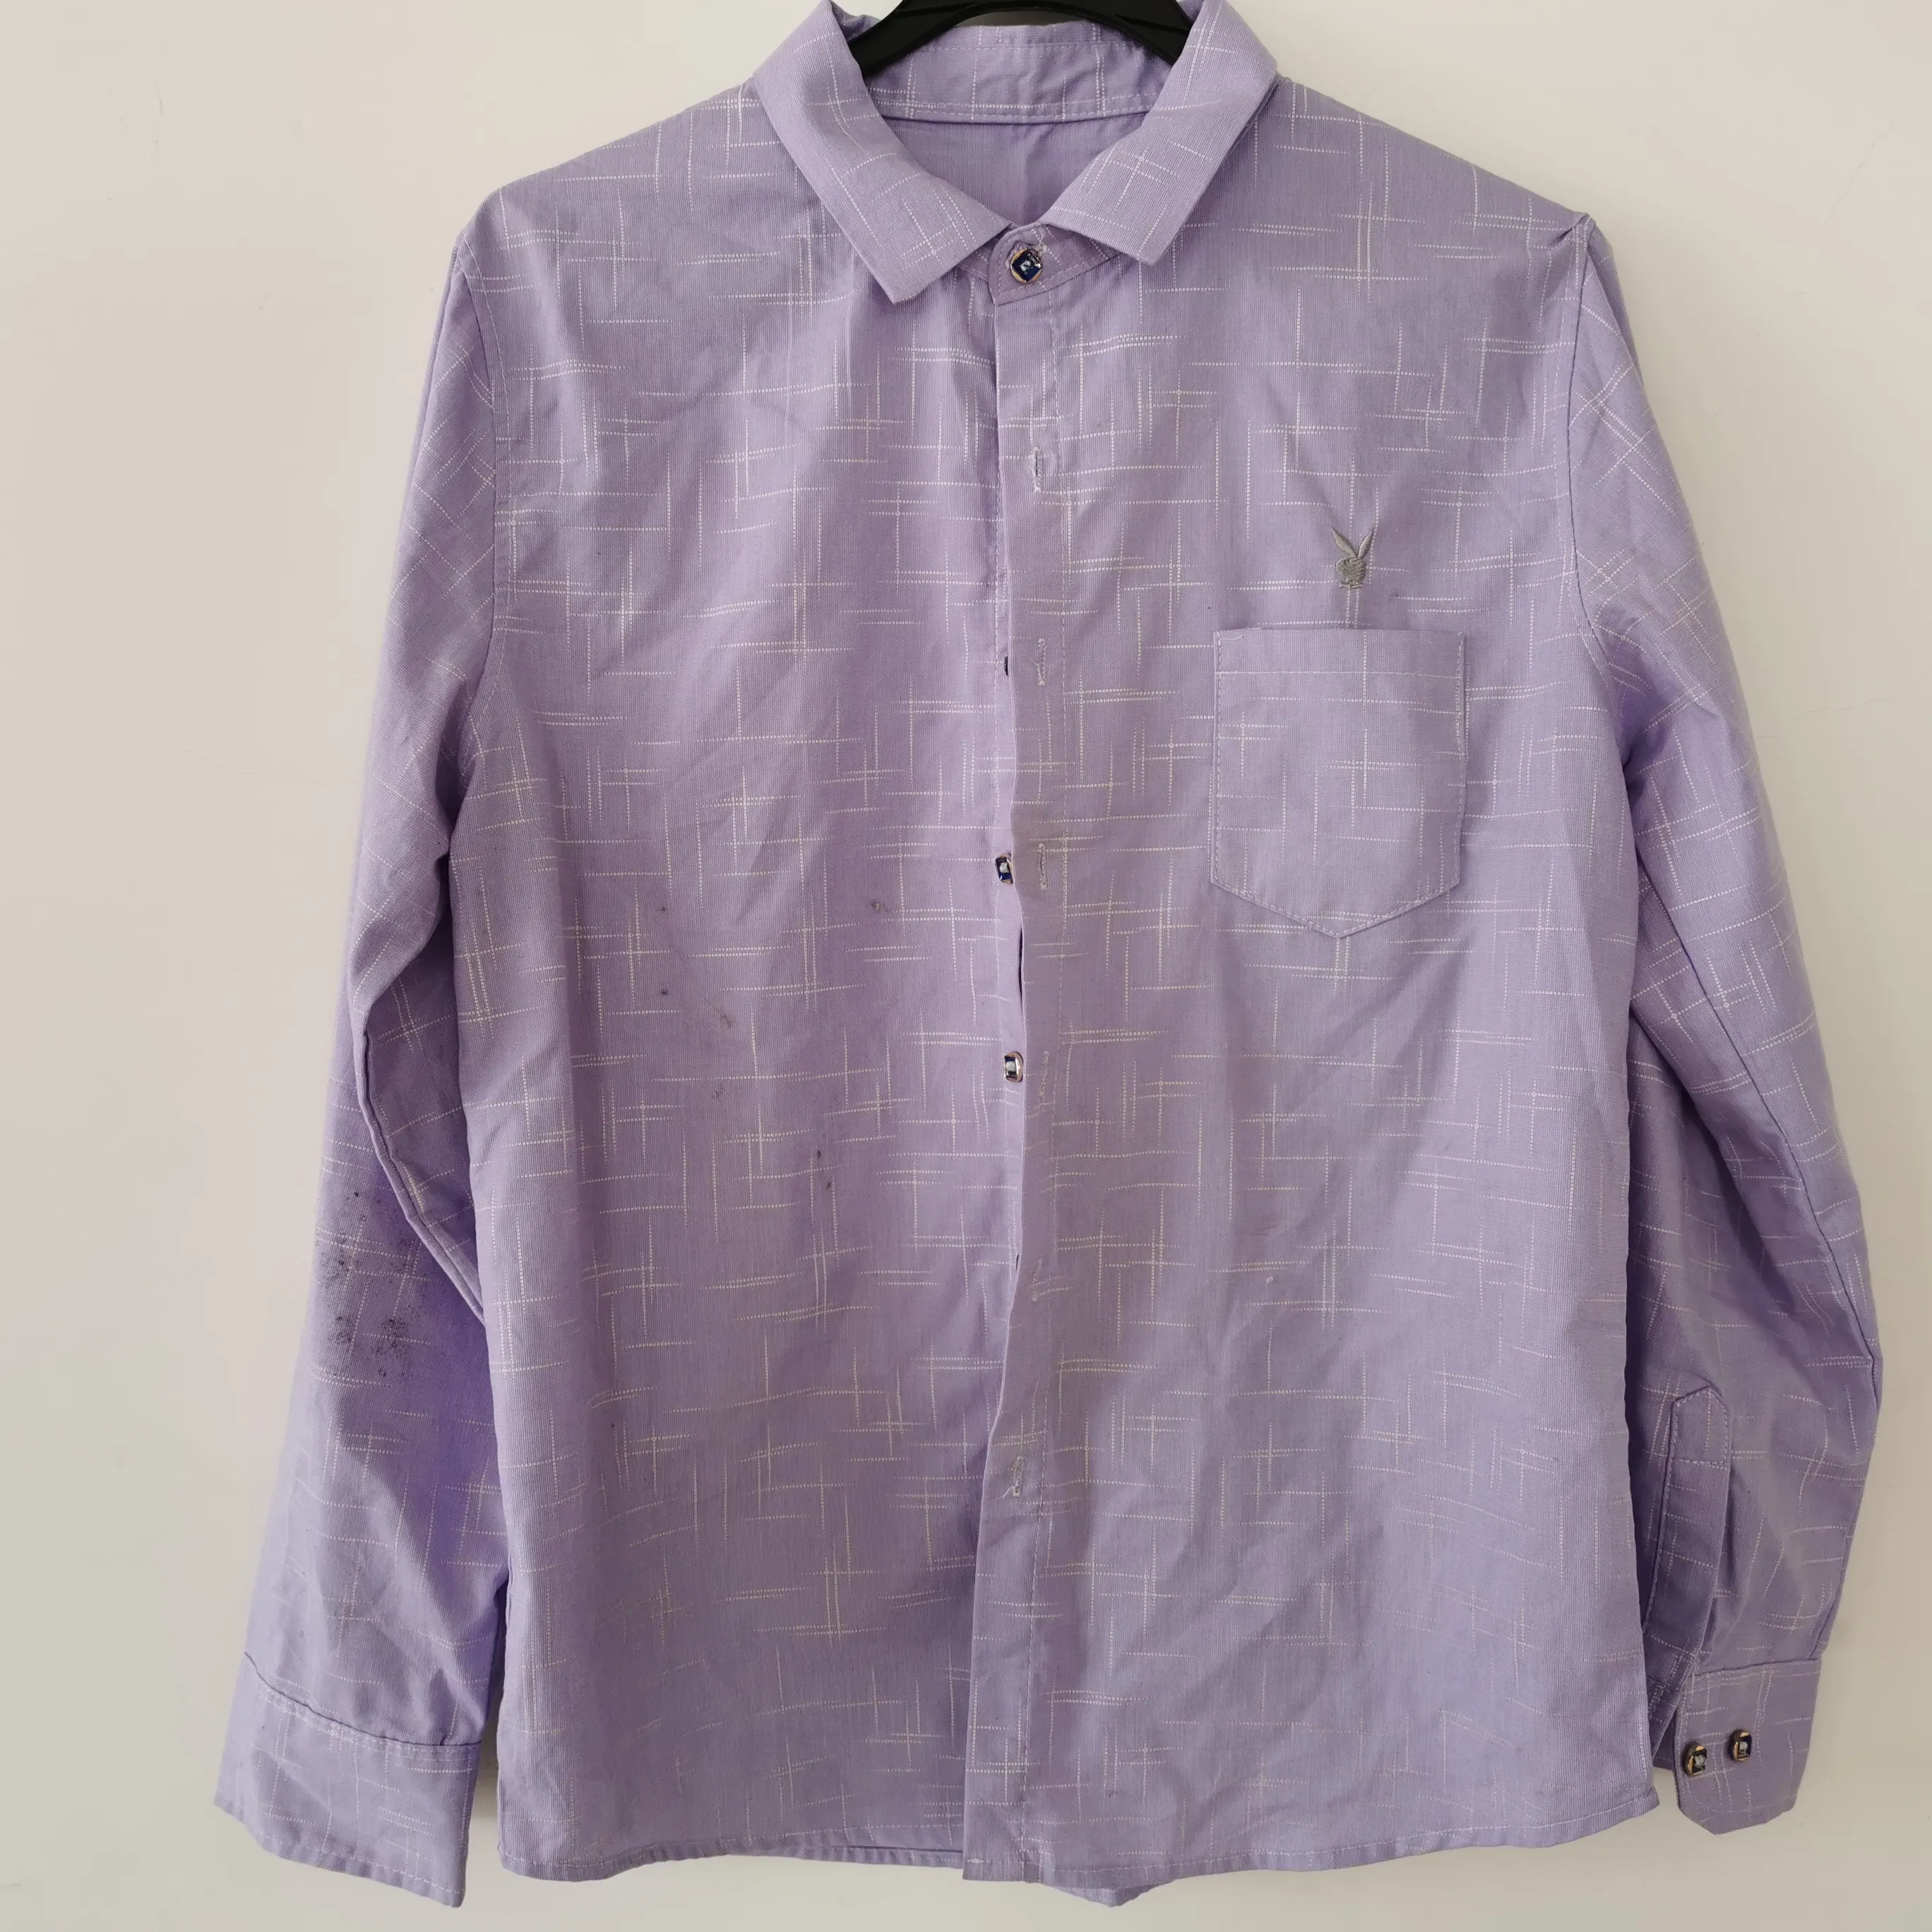 Buying Used Clothes Used Clothing Mozambique of Mixed Italy Bales Dress Sale Wholesale Shirt Shoes Summer